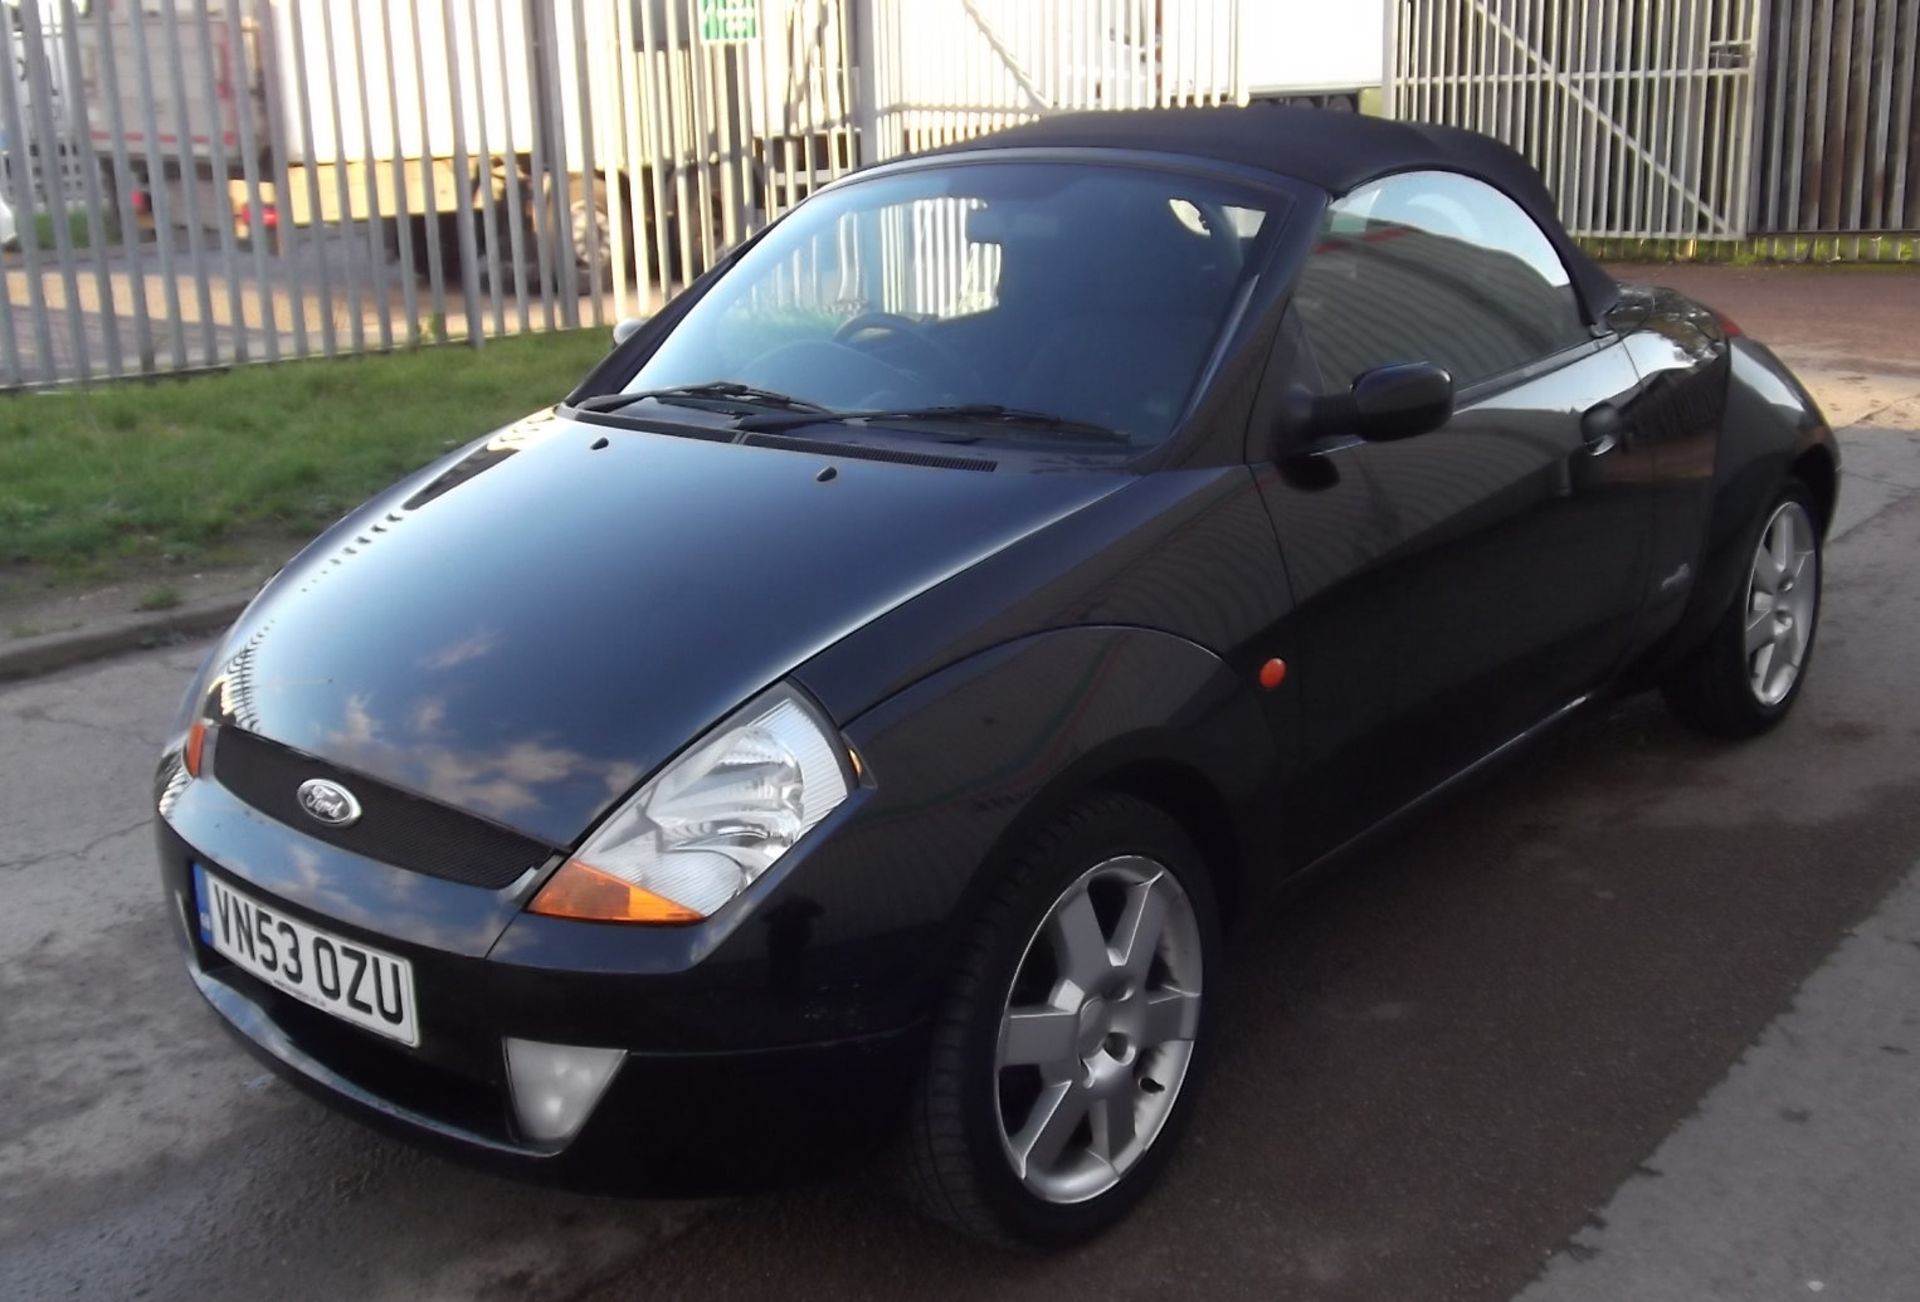 2003 Ford StreetKa 1.6 2 Door Convertible - CL505 - NO VAT ON THE HAMMER - Location: Corby, Northamp - Image 3 of 16